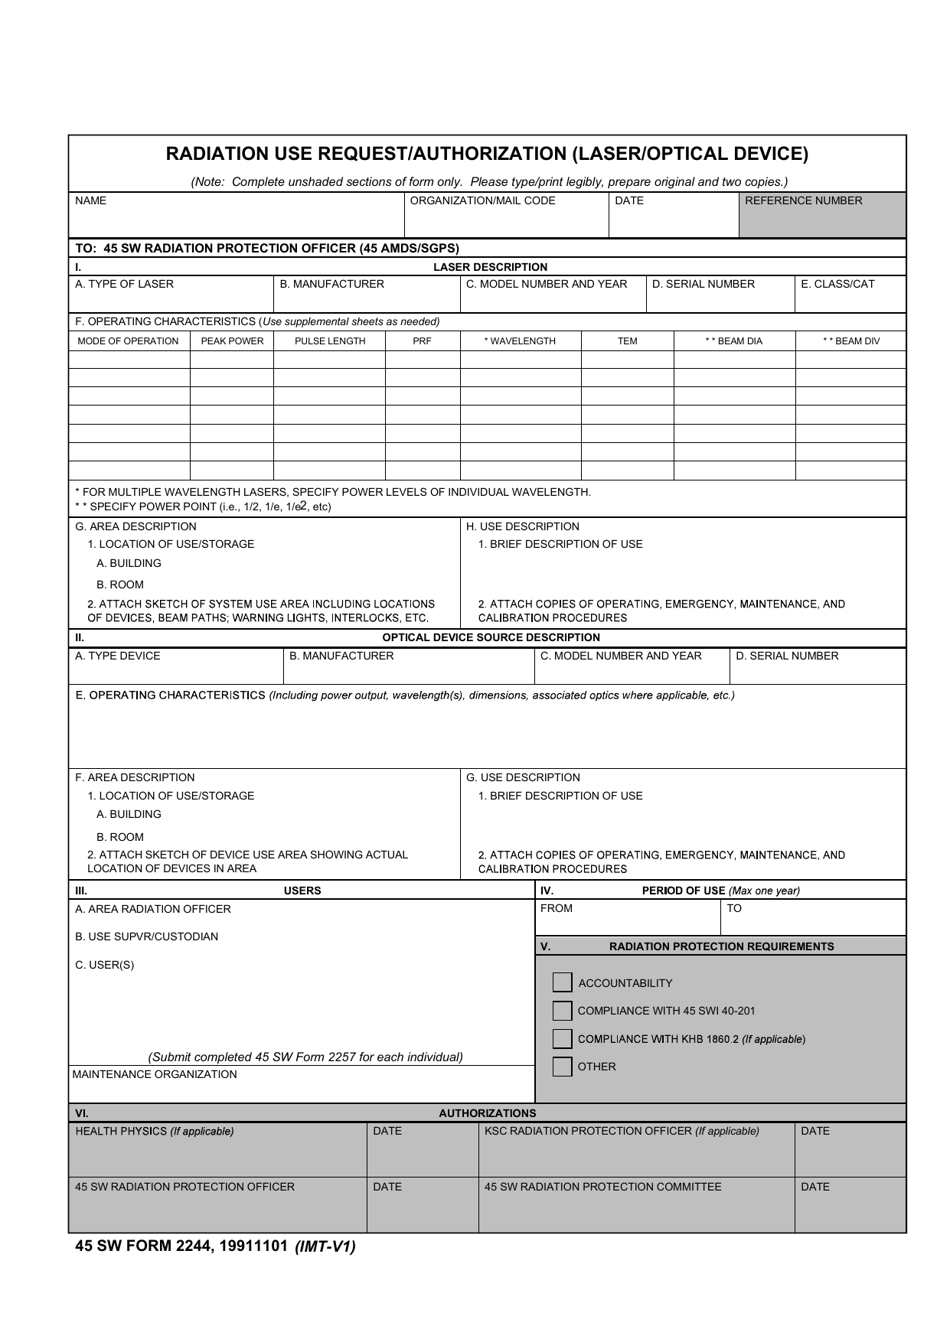 45 SW Form 2244 Radiation Use Request/Authorization (Laser/Optical Device), Page 1